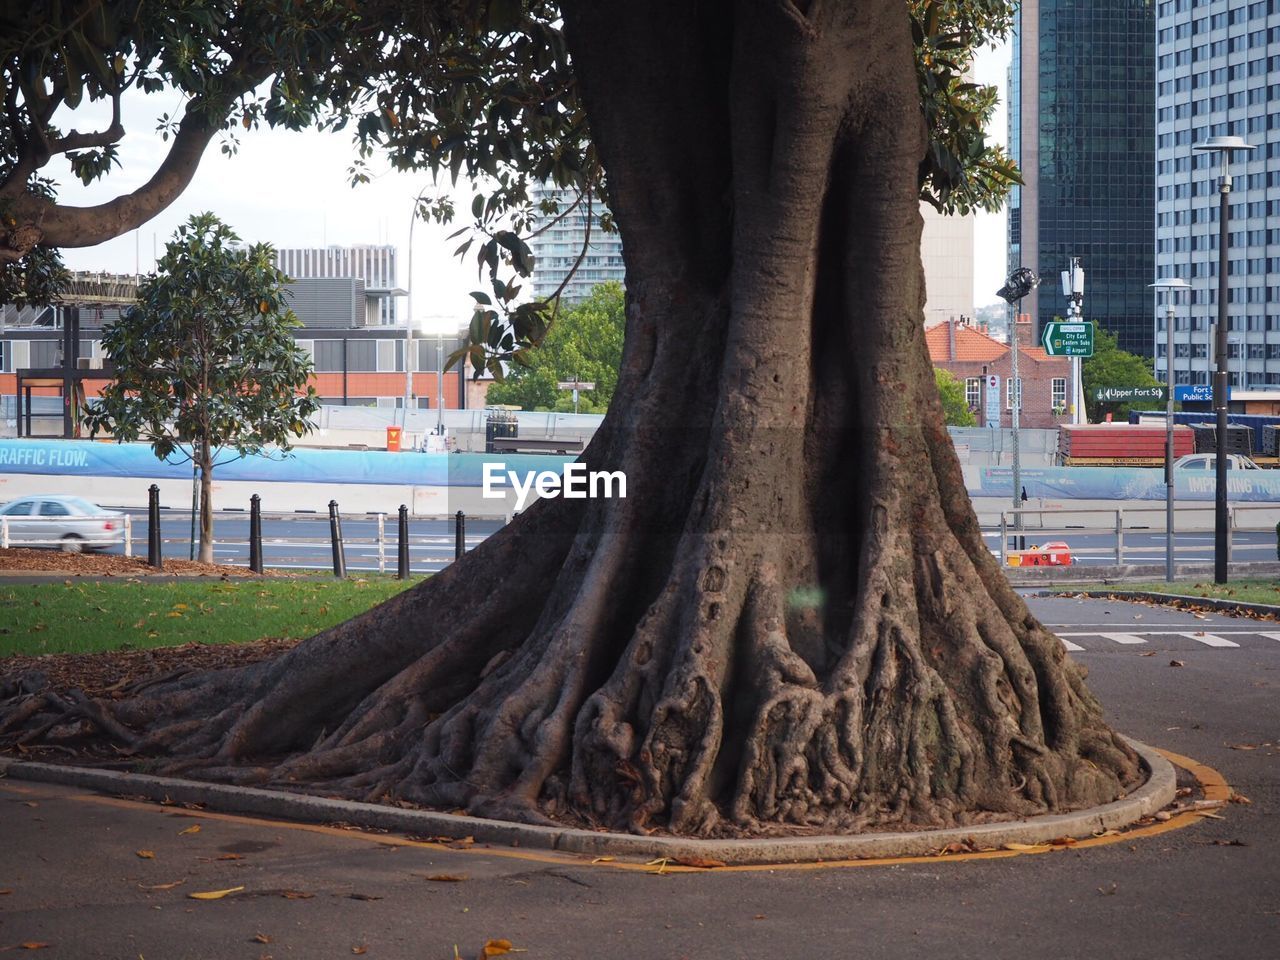 VIEW OF TREE IN CITY